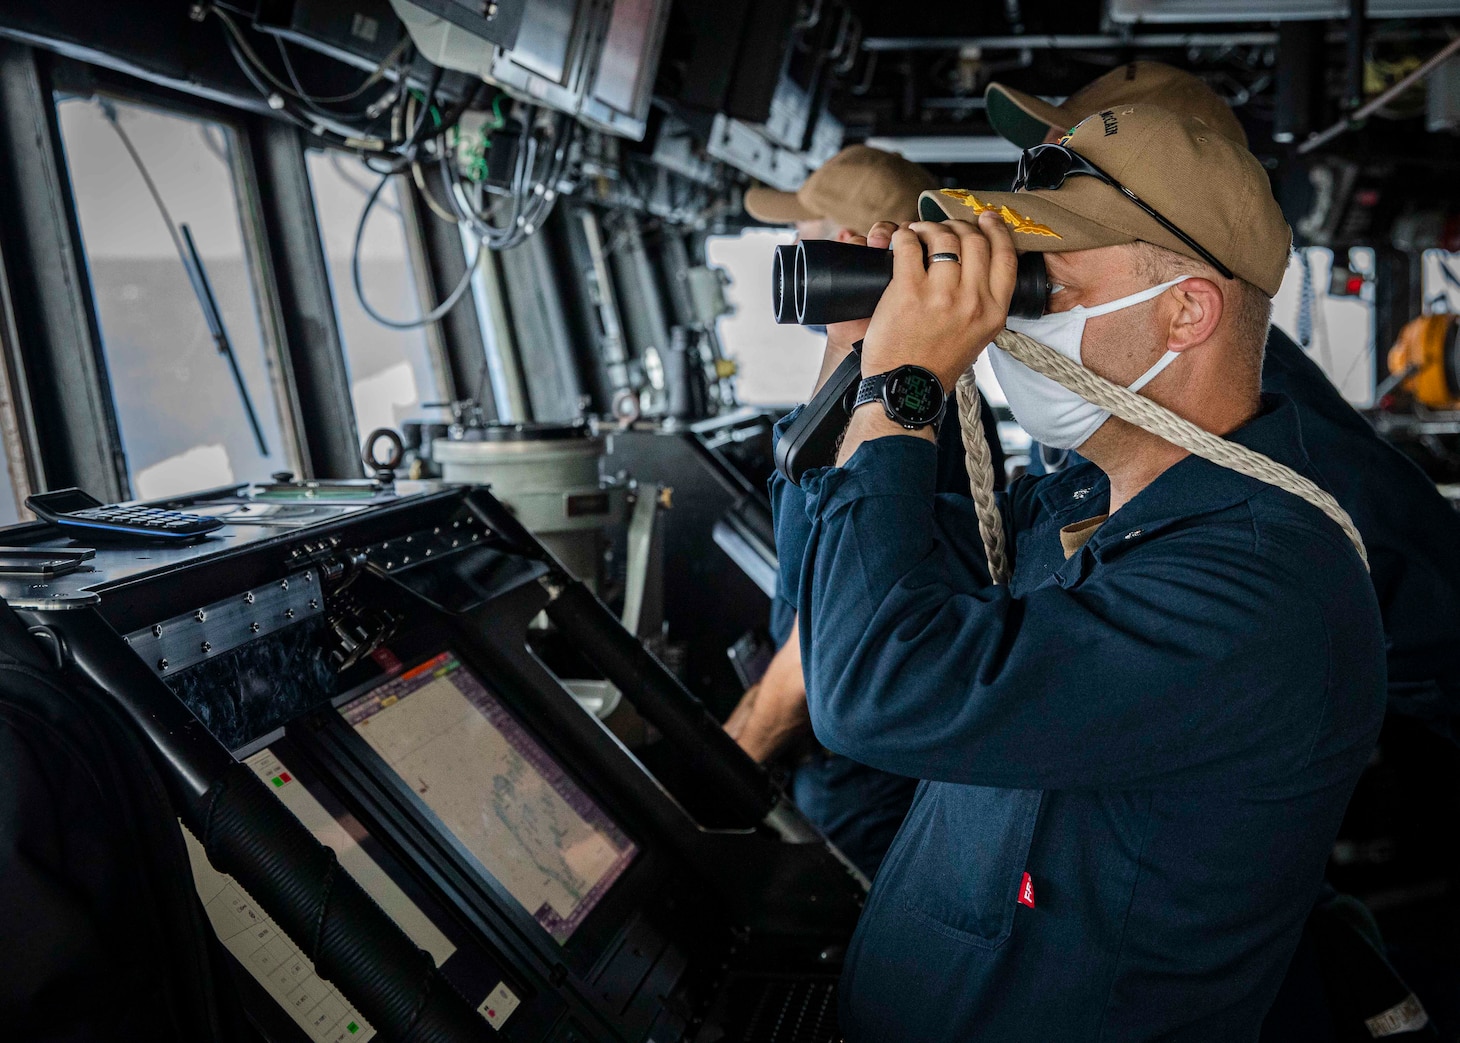 SOUTH CHINA SEA (Dec. 22, 2020) Cmdr. Ryan T. Easterday, commanding officer of the guided-missile destroyer USS John S. McCain (DDG 56) scans the horizon from the pilot house as the ship conducts routine underway operations. McCain is forward-deployed to the U.S. 7th Fleet area of operations in support of security and stability in the Indo-Pacific region. (U.S. Navy photo by Mass Communication Specialist 2nd Class Markus Castaneda)